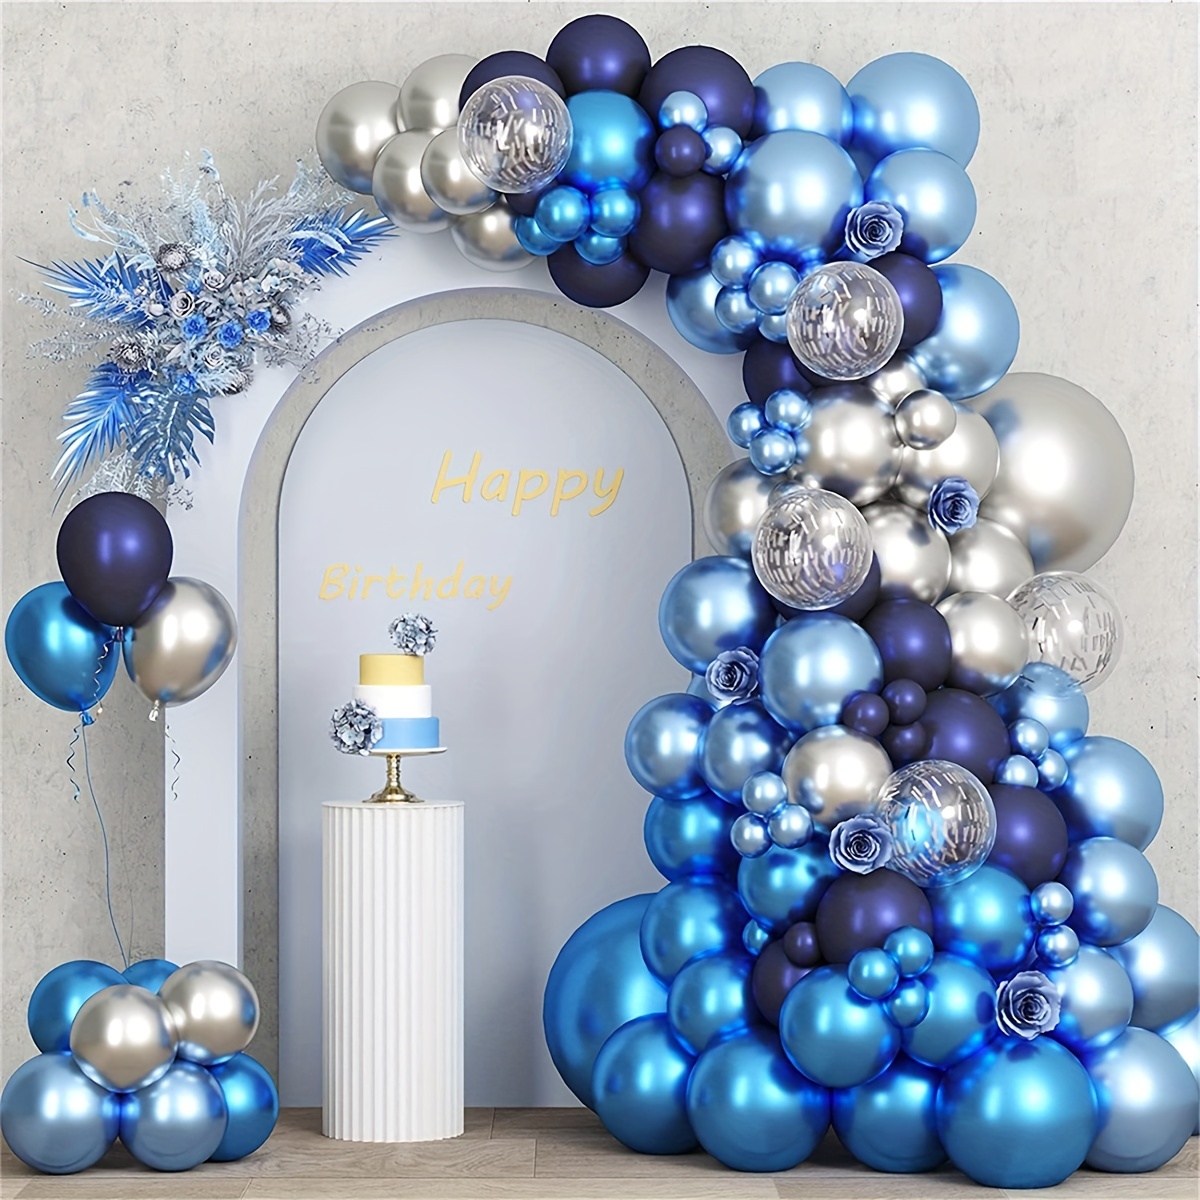 Blue and Black Silver Balloon Garland Kit 140pcs Royal Blue and Silver Starburst Disco Ball Balloons for Men 30th Birthday Party Graduation 80s 90s